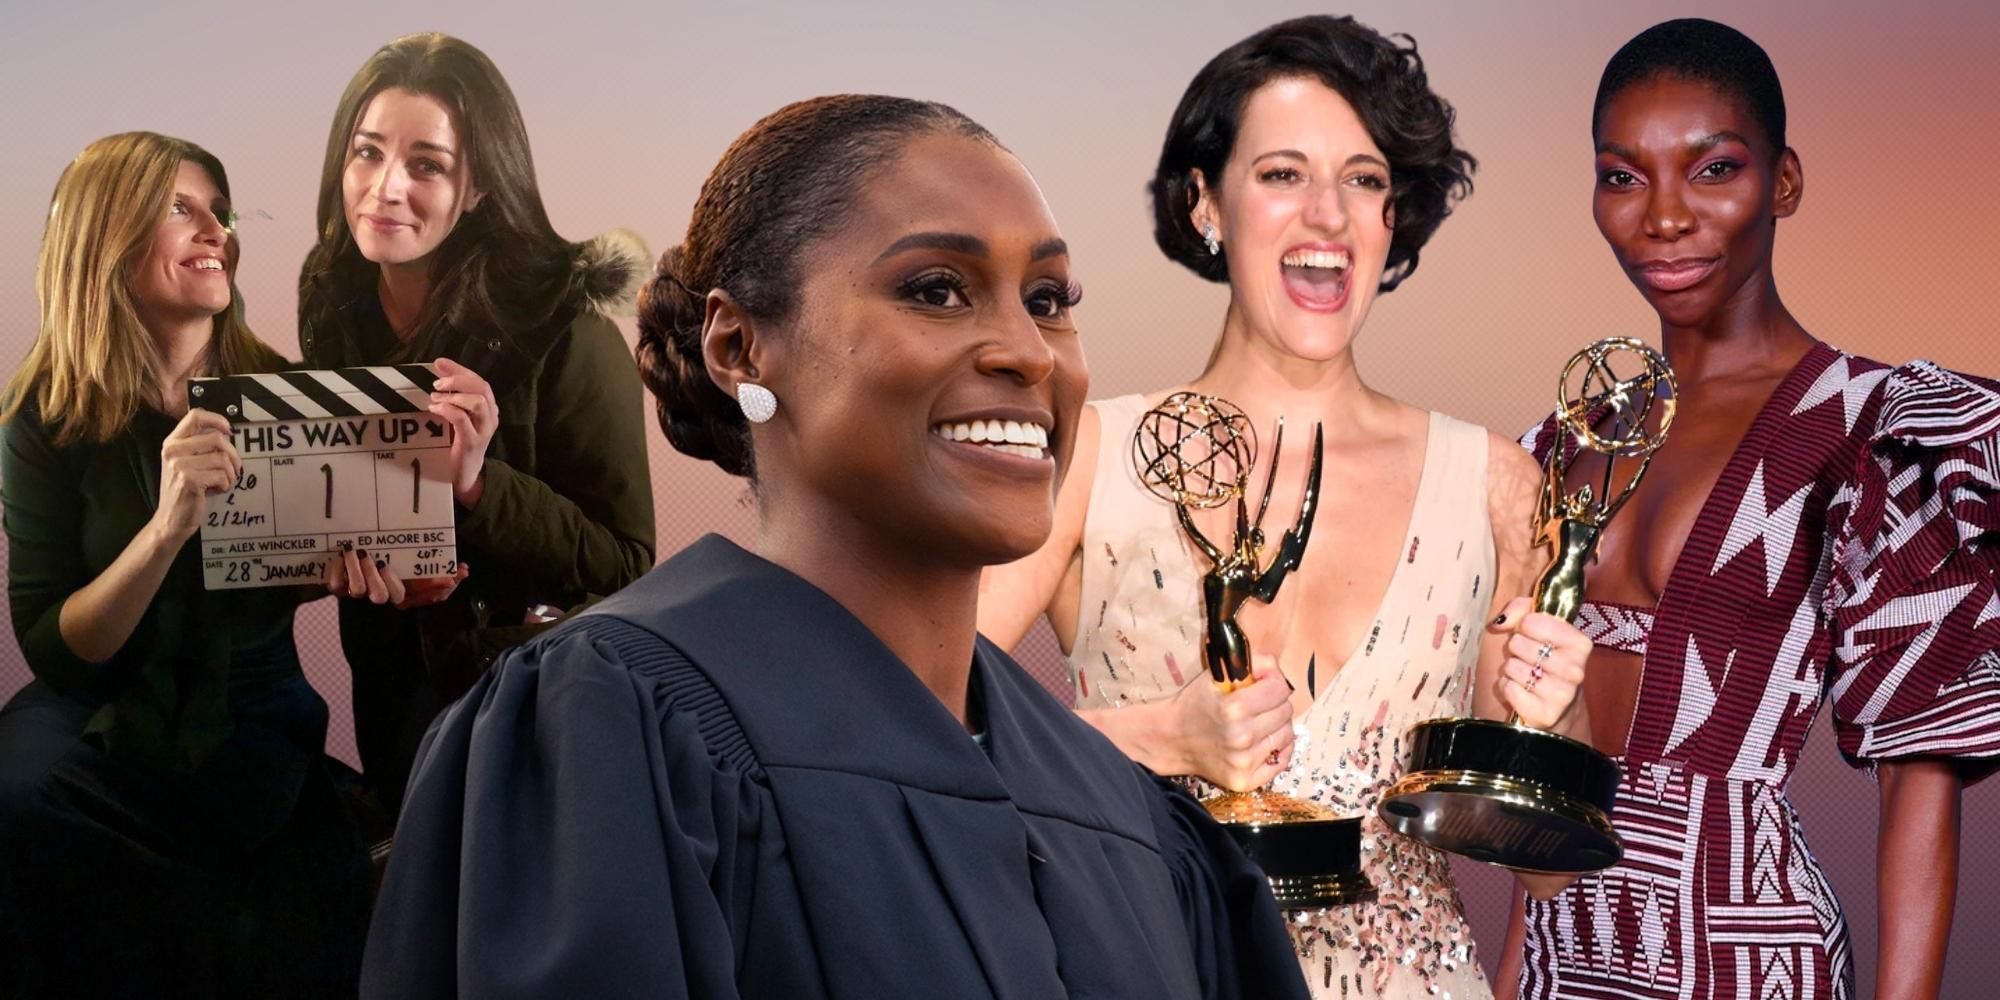 Aisling Bea and Sharon Horgan on the set of This Way Up, Issa Rae doing graduation speak, Phoebe Waller-Bridge with awards and Michaela Coel at an awards ceremony